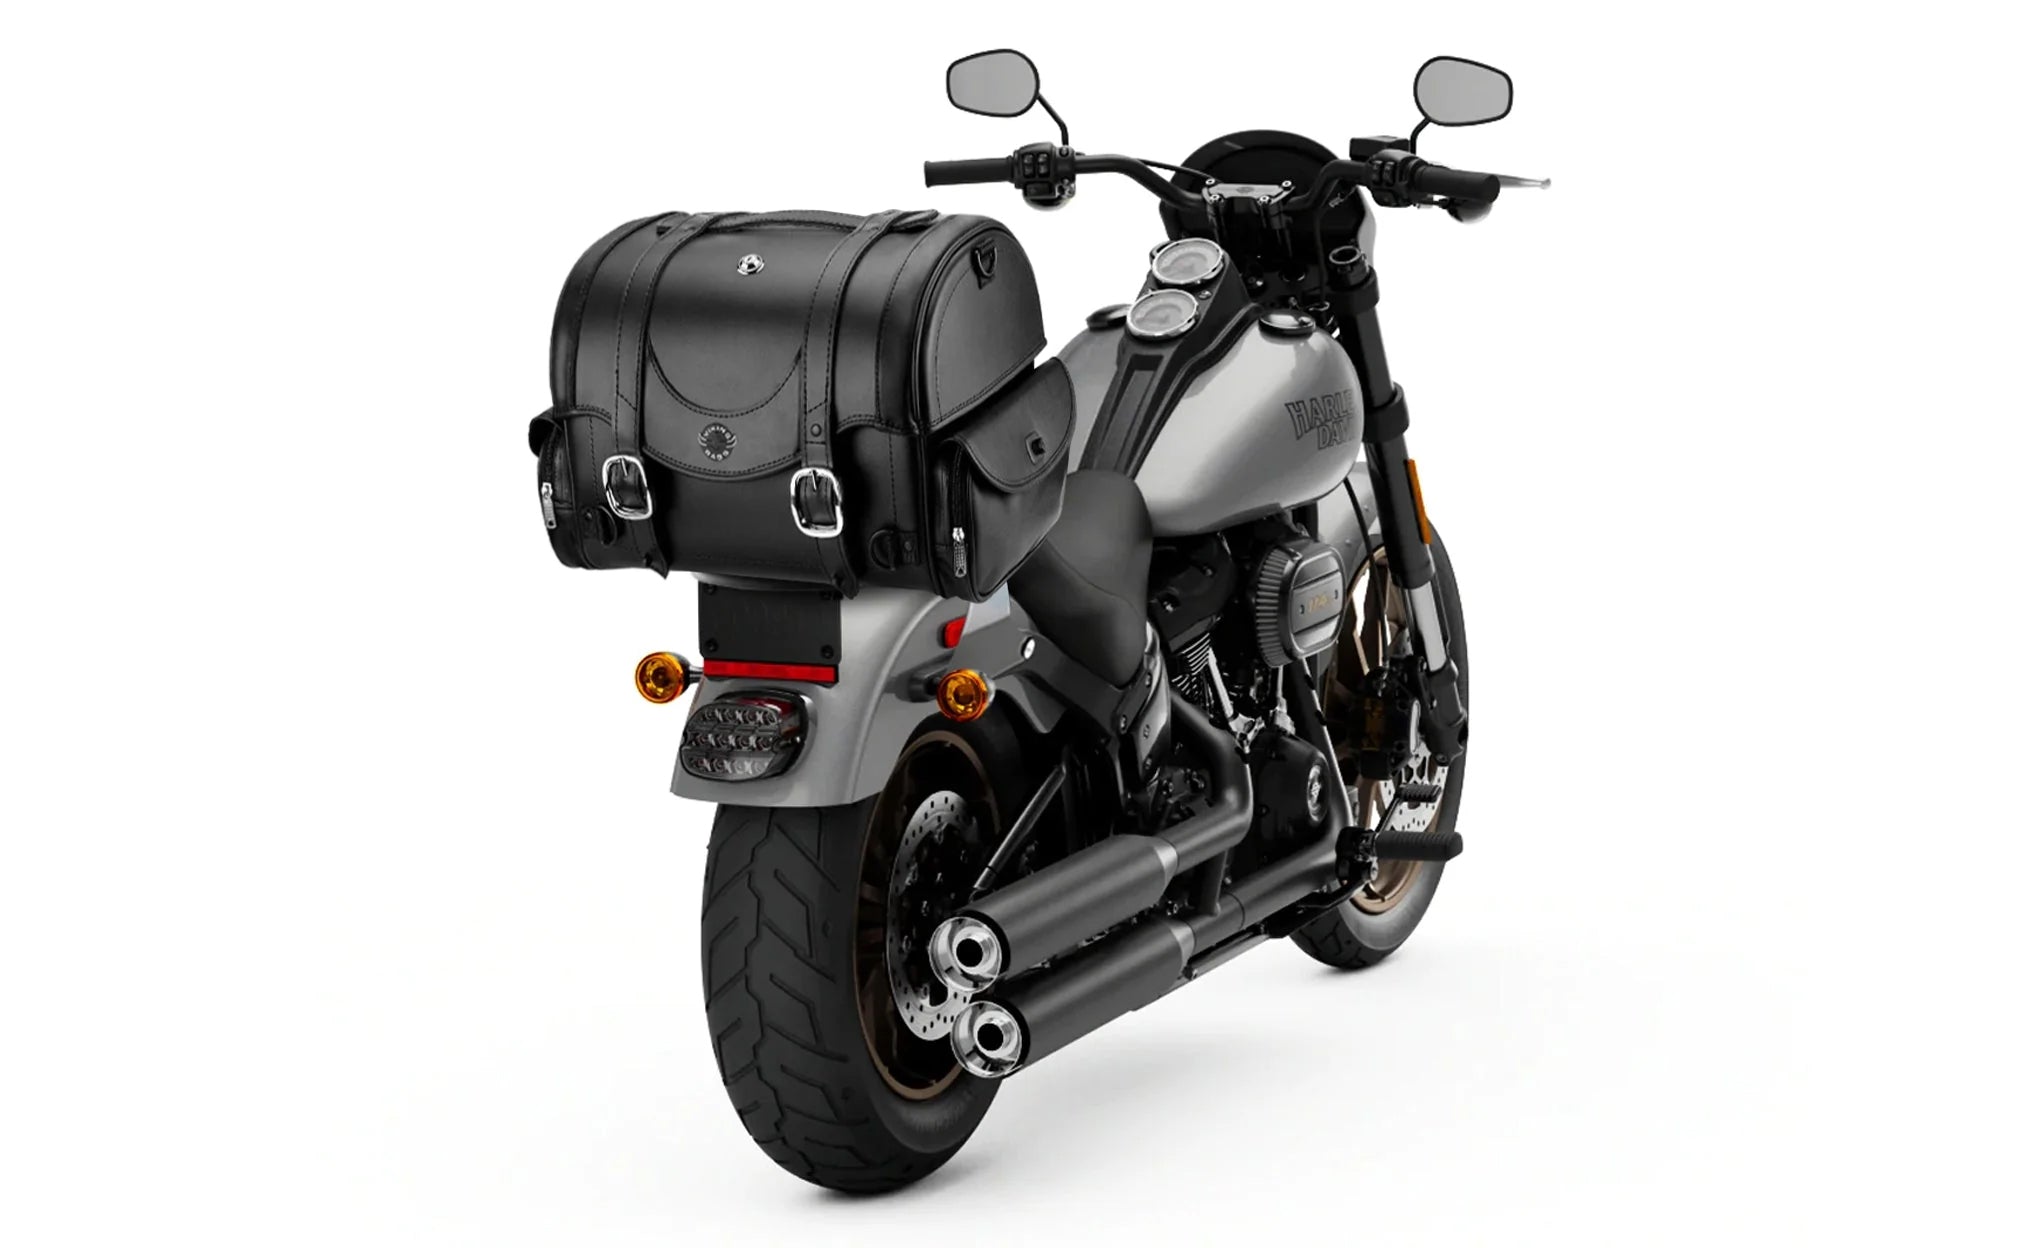 21L - Century Medium Victory Leather Motorcycle Roll Bag on Bike Photo @expand